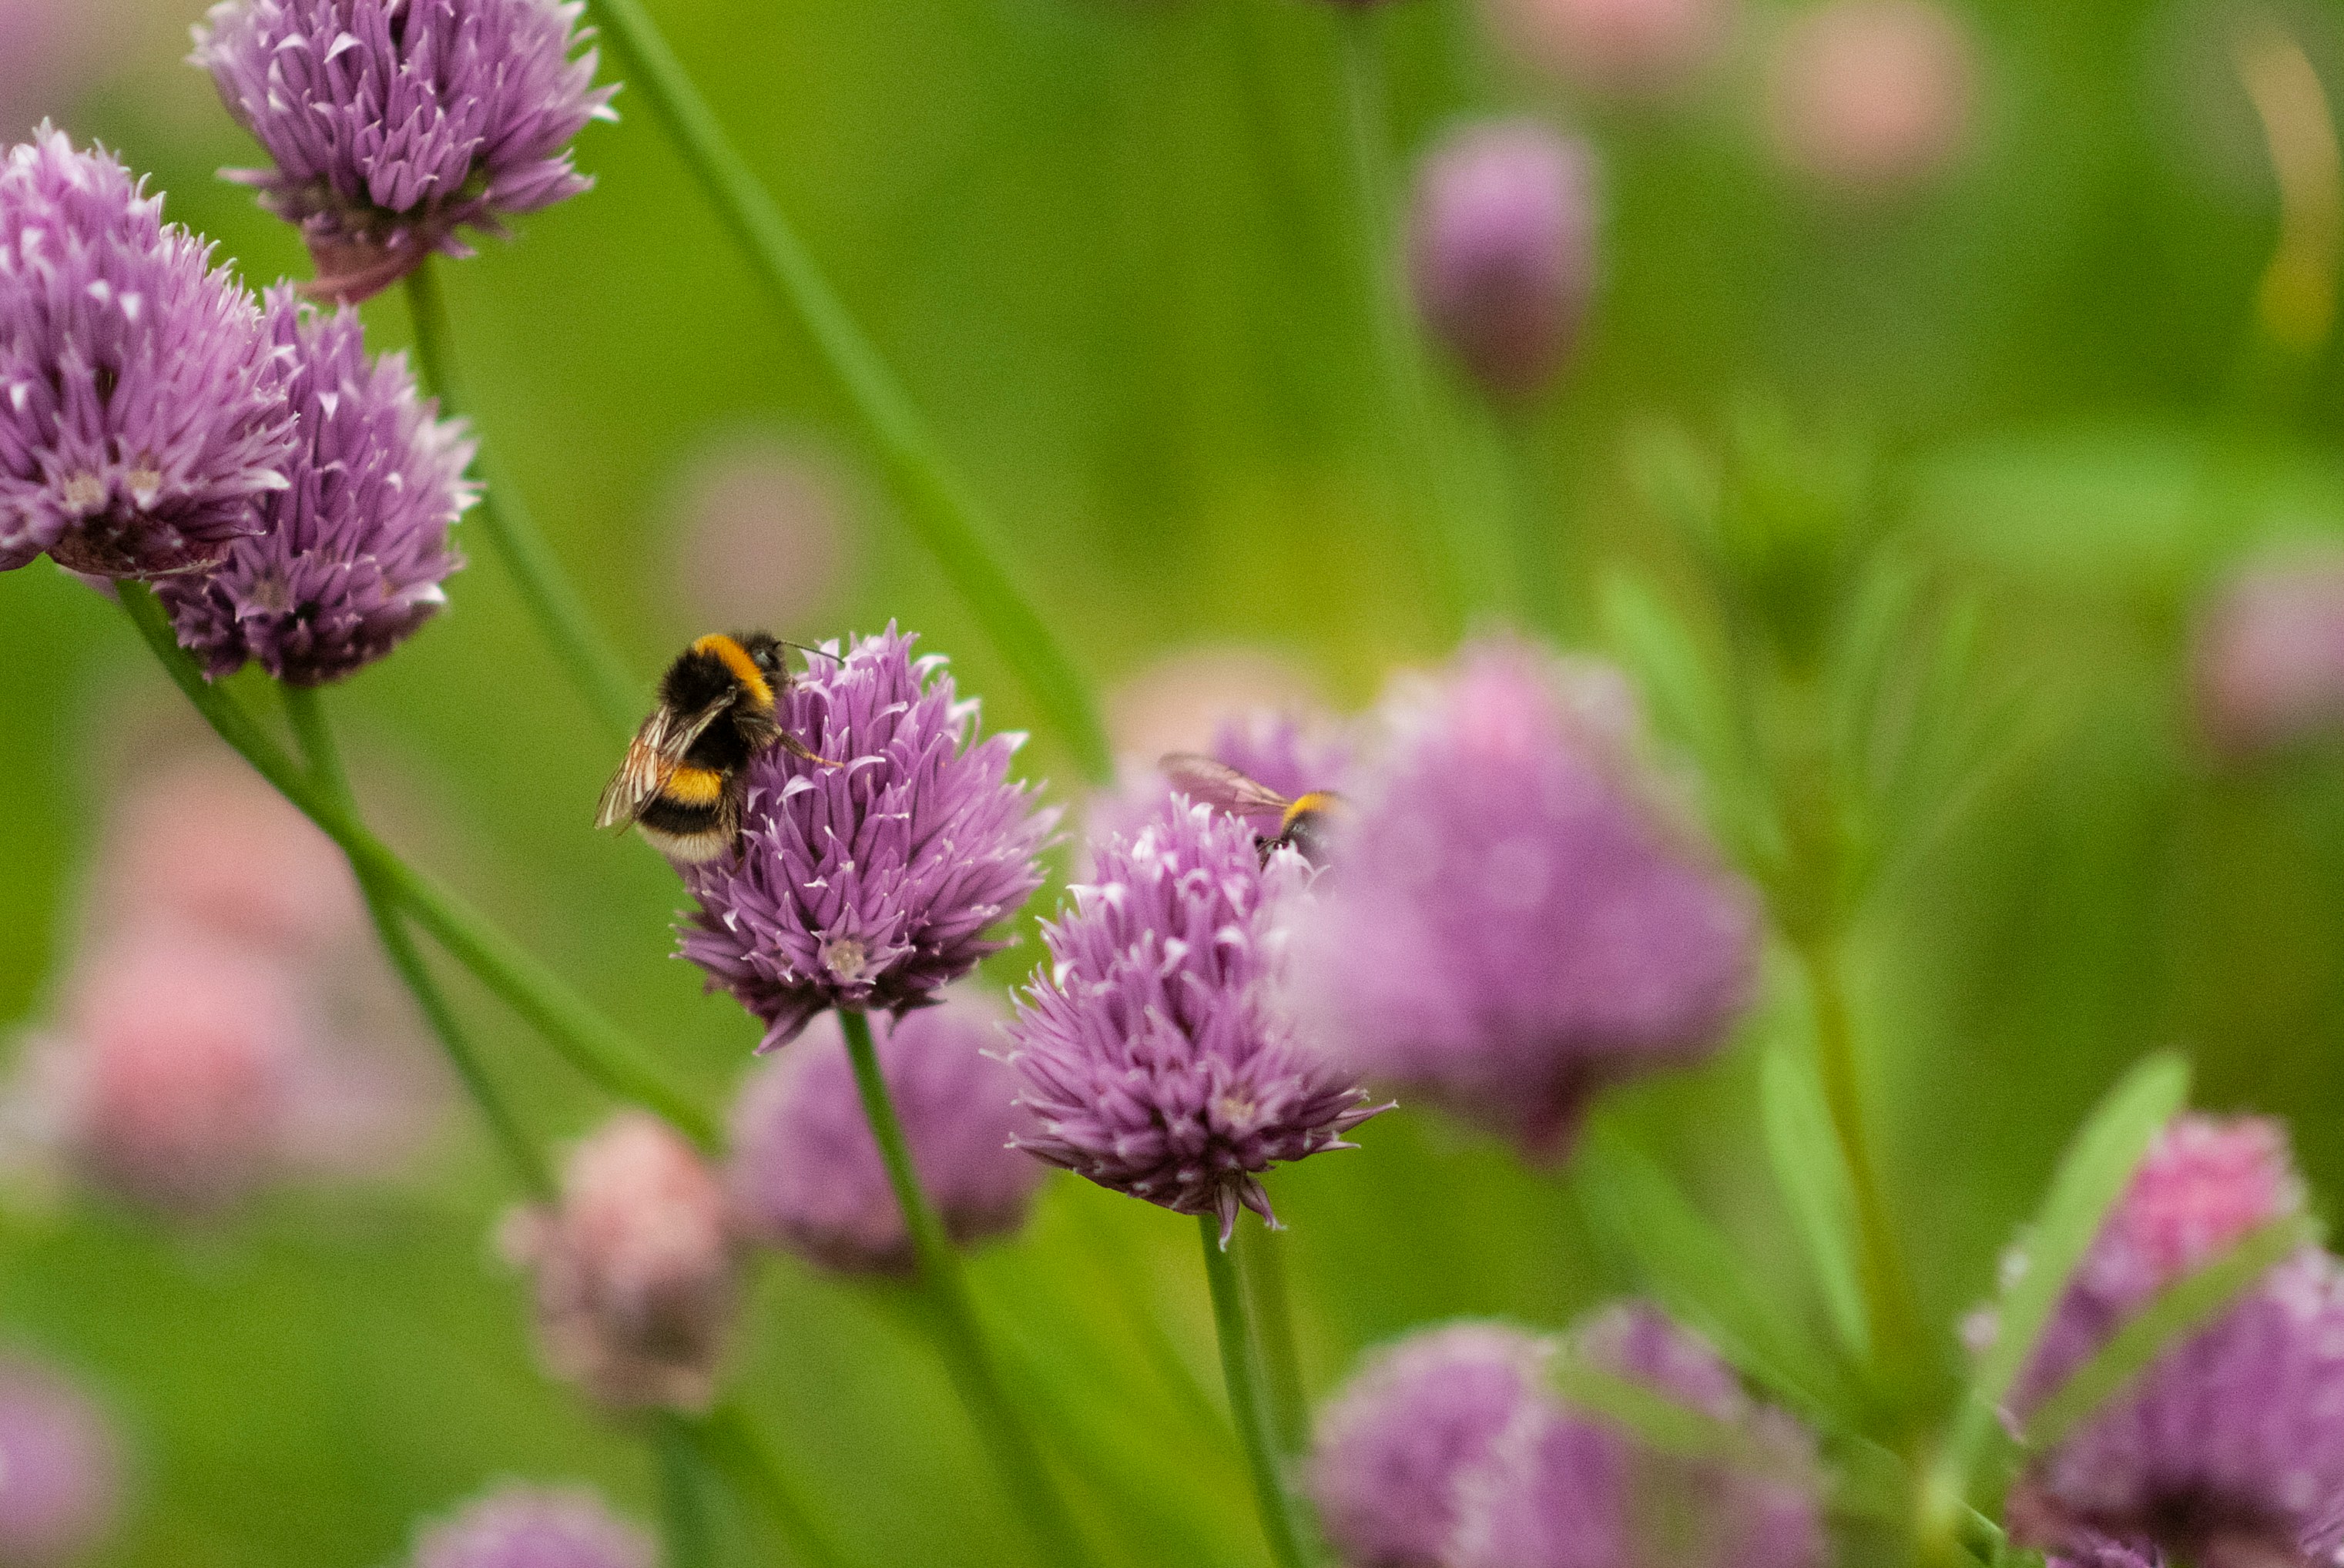 Allium plants like chives, onions, and garlic are excellent companion plants for tomatoes thanks to their pest-repellent qualities.